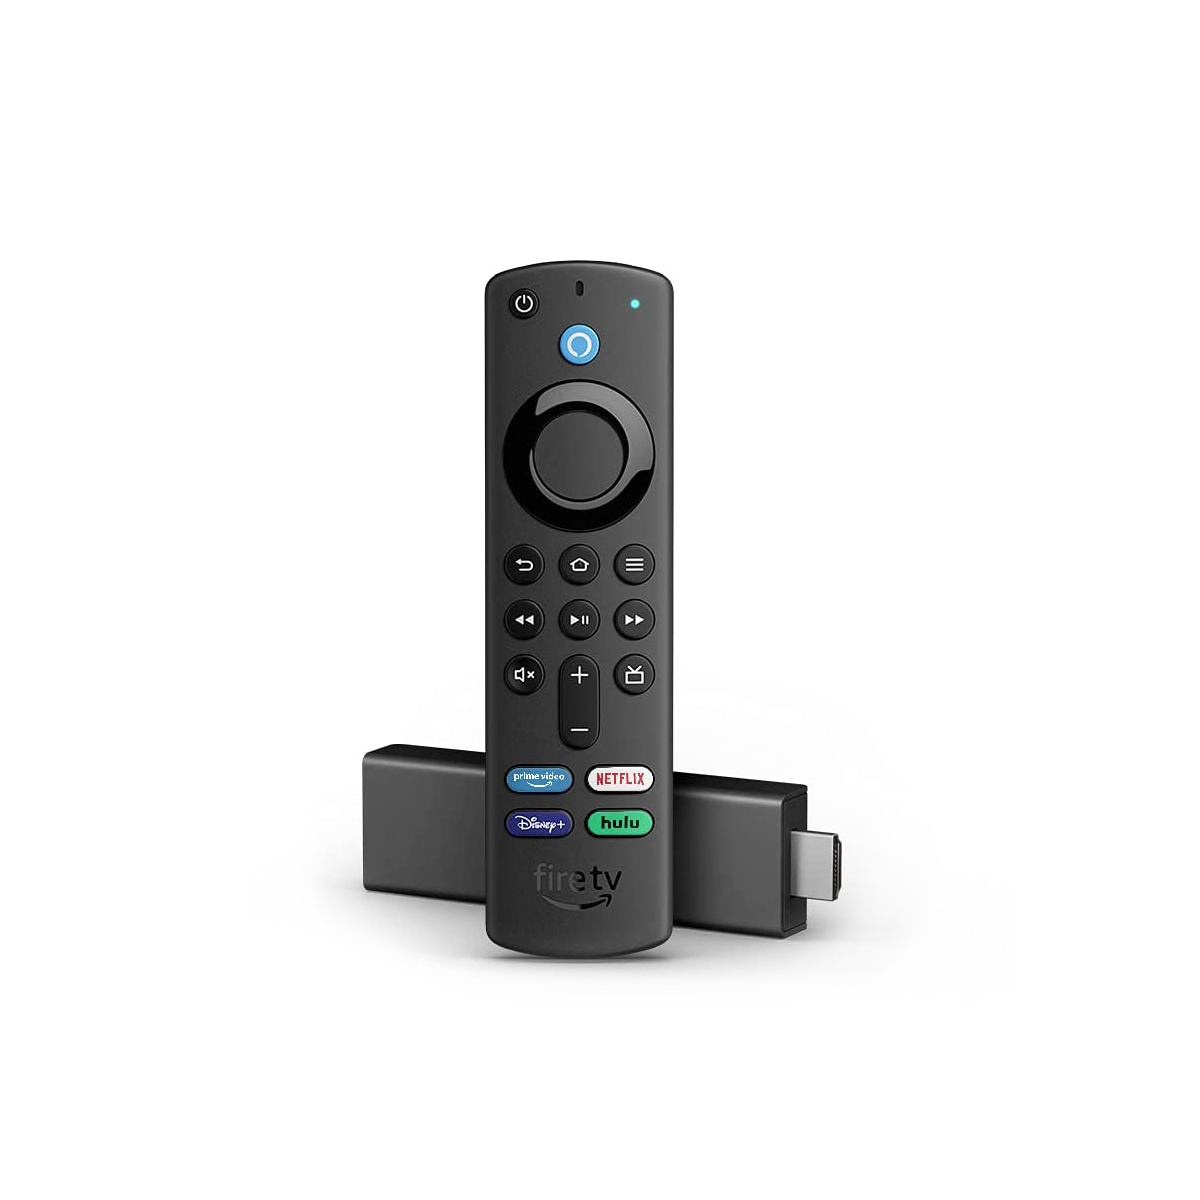 STREAMING AMAZON FIRE TV STICK 4K B08XVYZ1Y5   ALEXA VOICE REMOTE  INCLUDES TV CONTROLS   DOLBY VISI